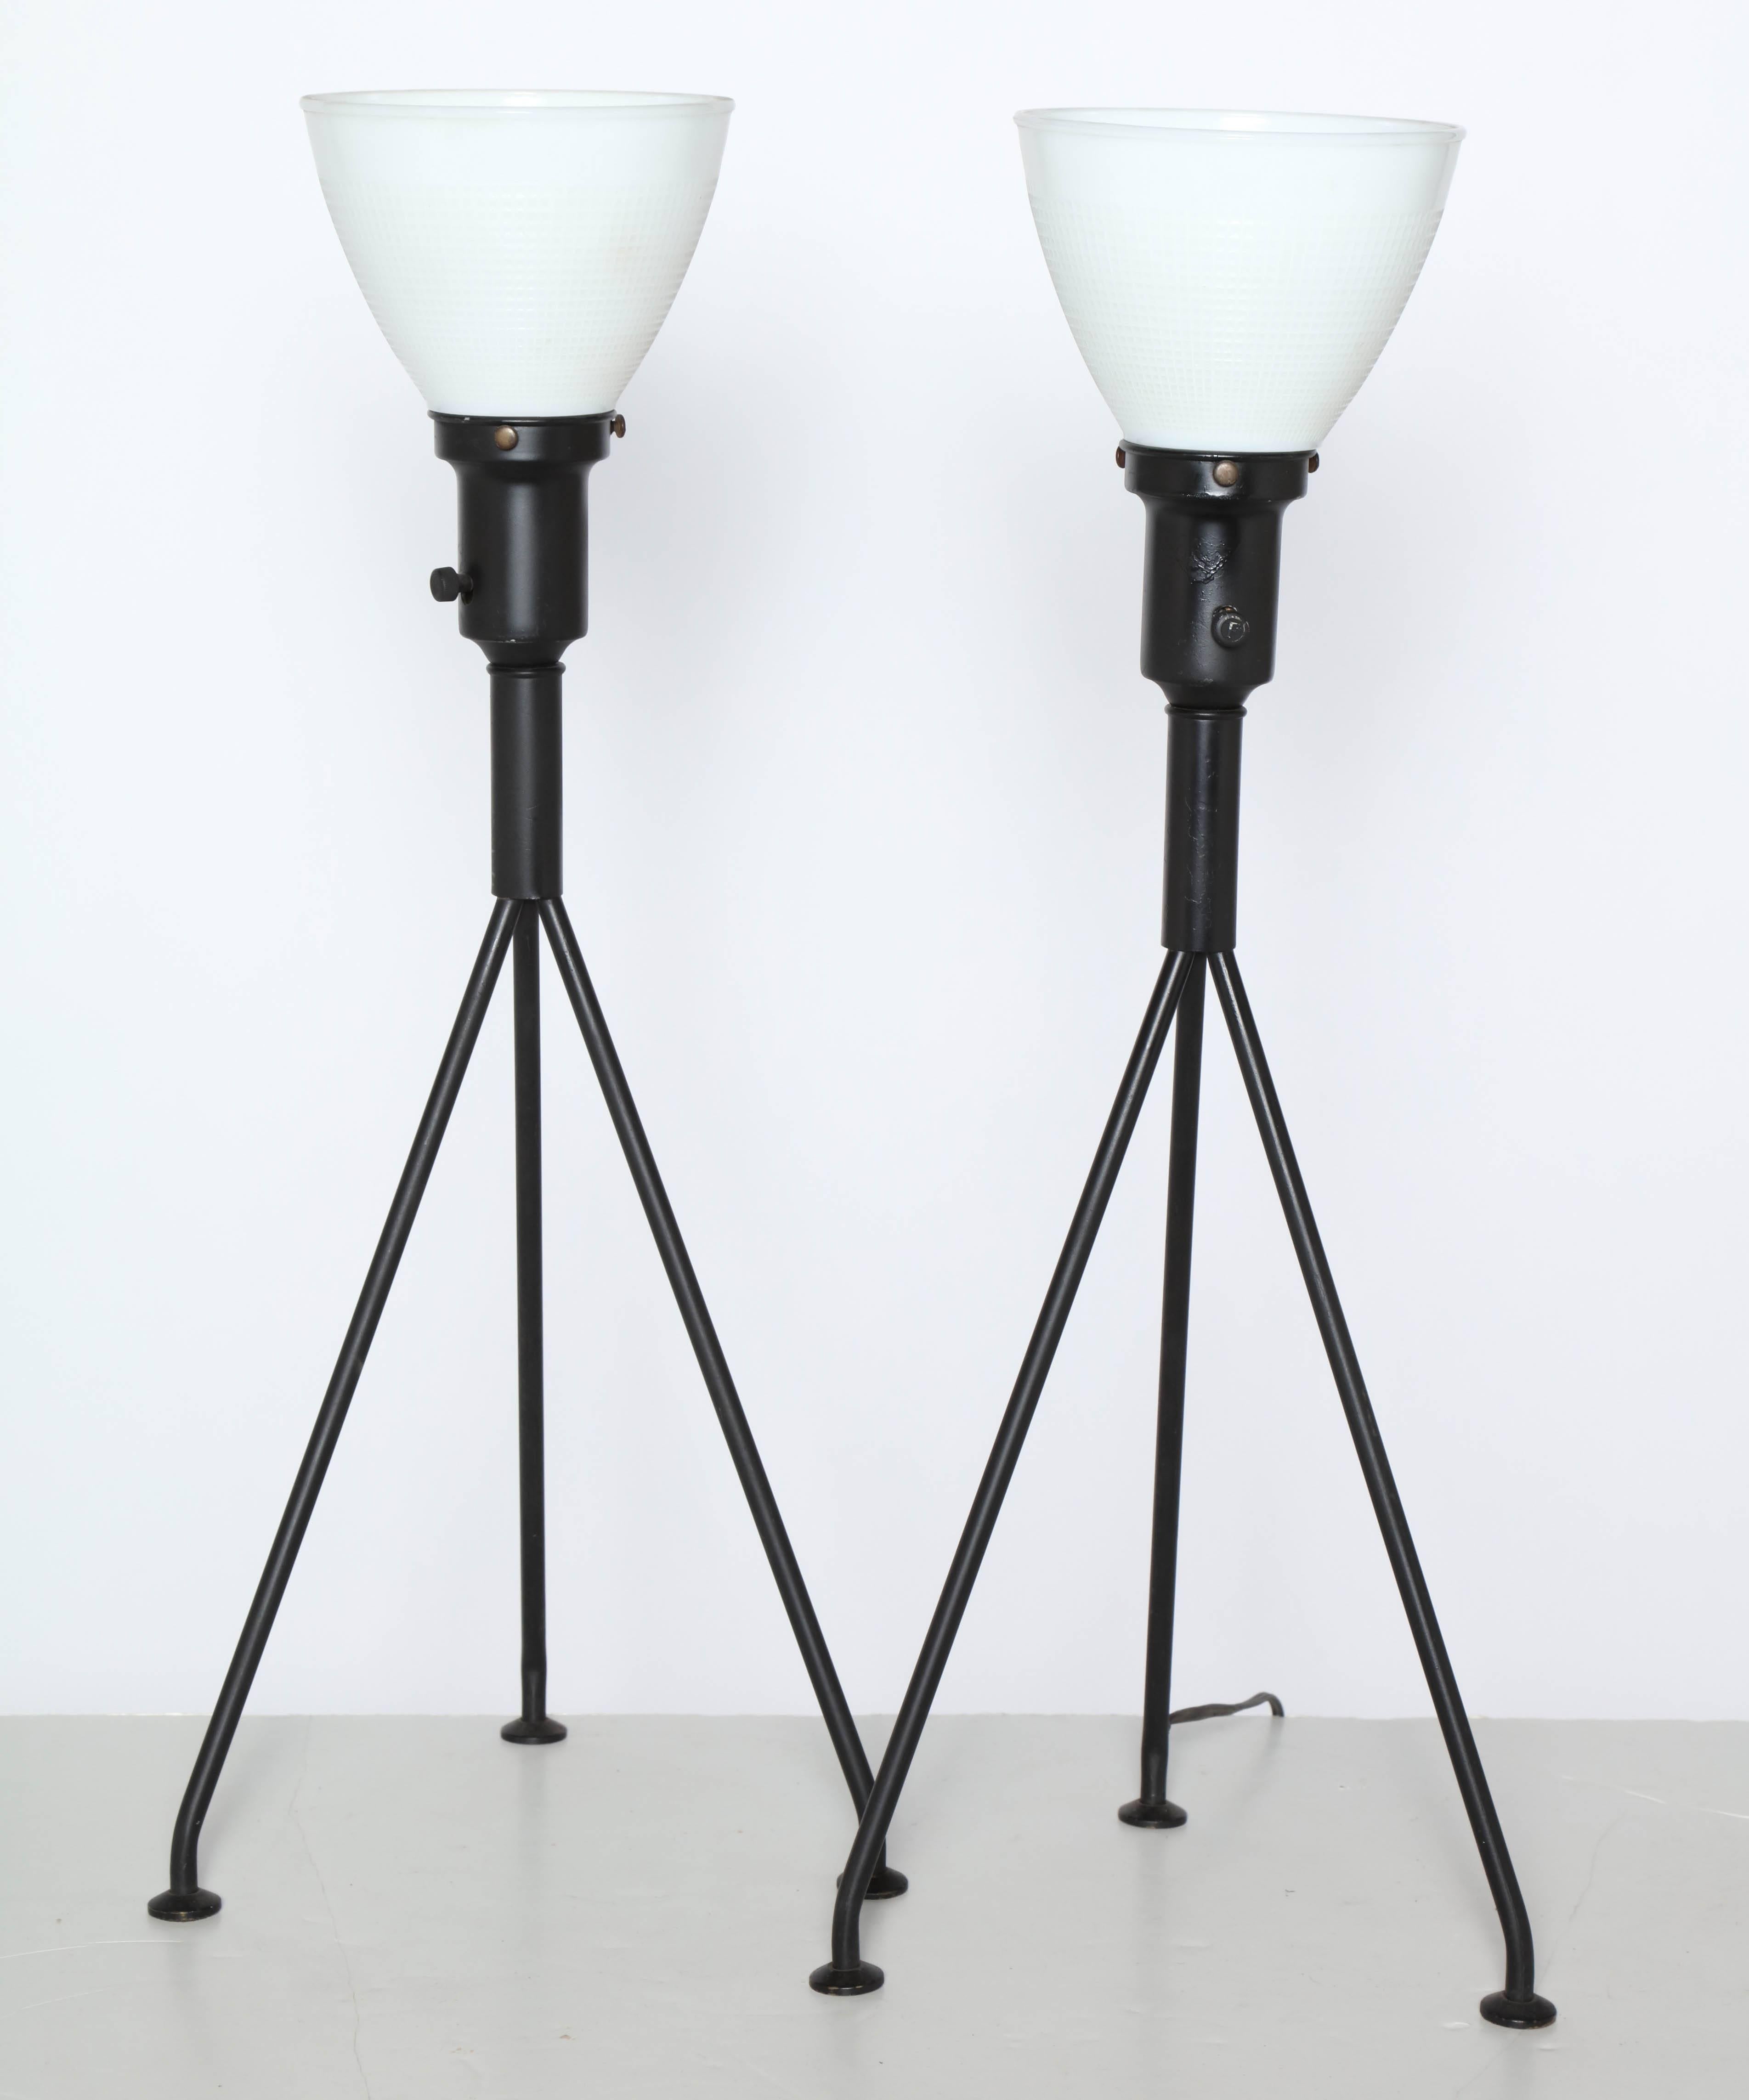 Pair of Gerald Thurston for Lightolier black and white table lamps, 1950s. Featuring balanced black enameled steel tripod legs, socket and neck, white milk glass liner shades atop rounded brass feet. For use with liner shades, with or without lamp